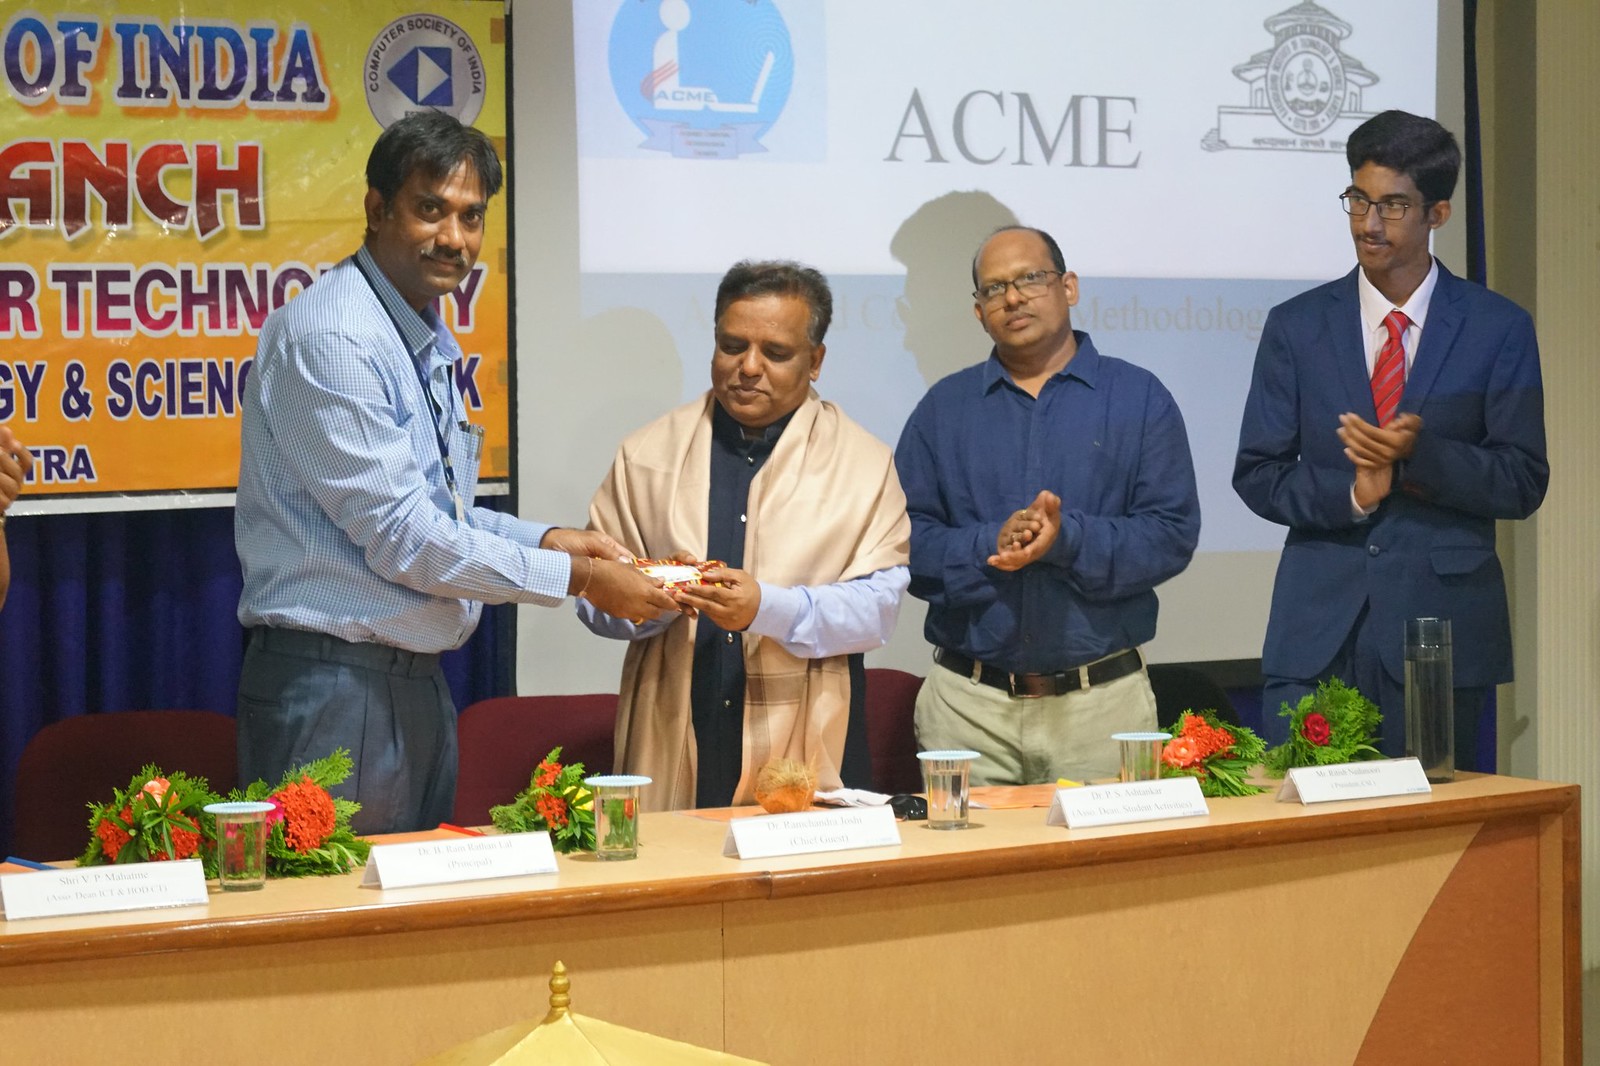 Inaugration of ACME forum